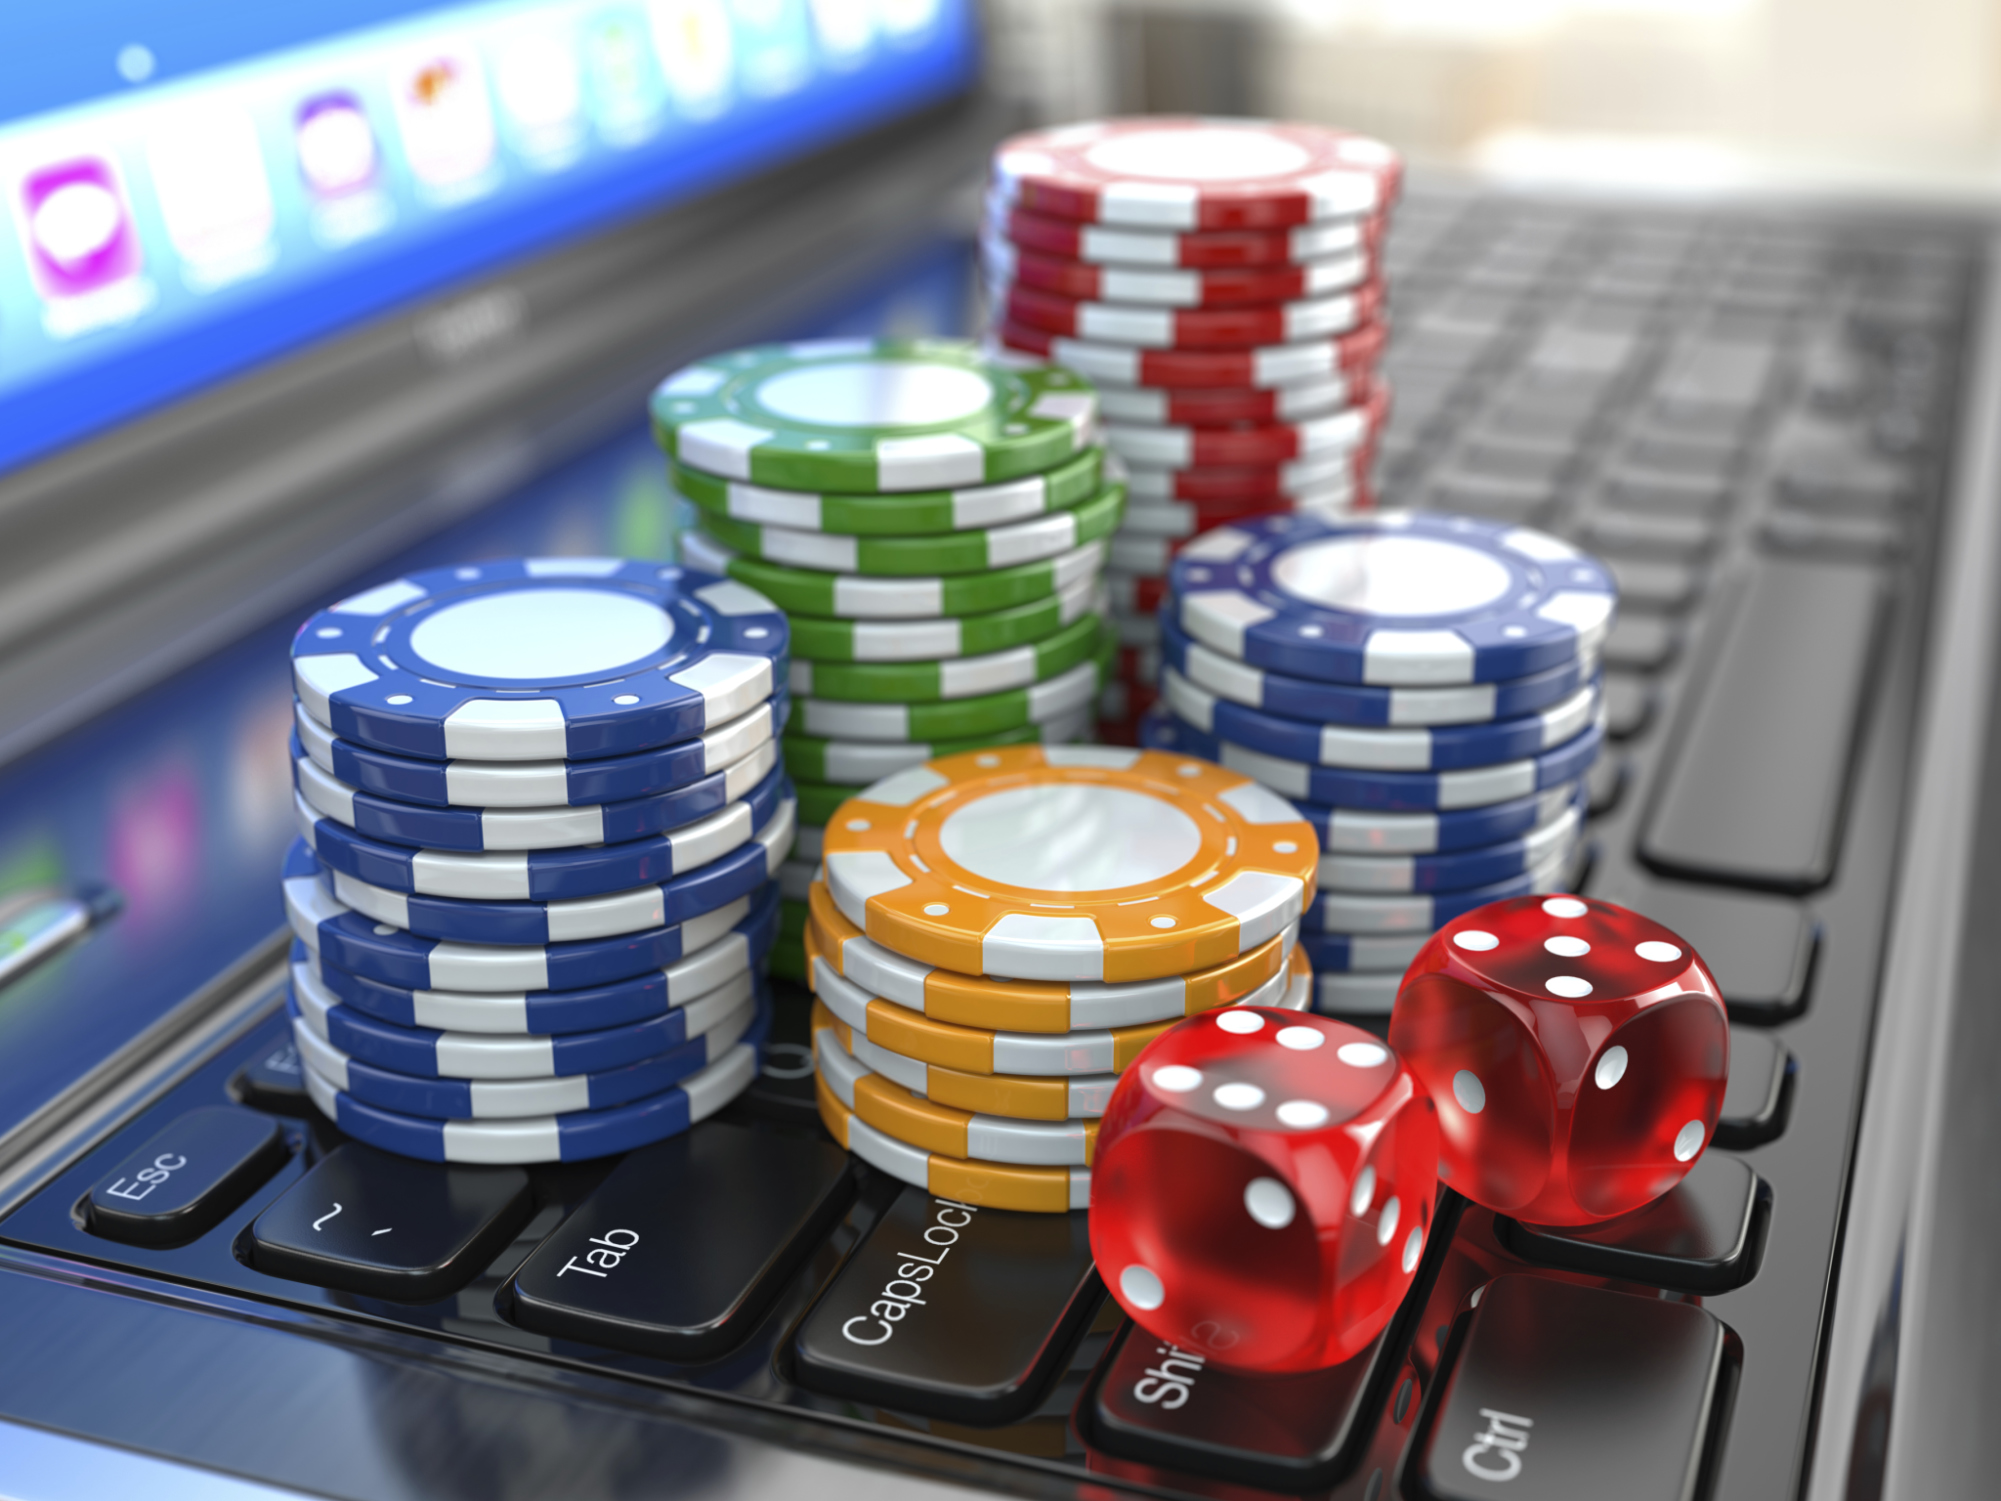 Get comfortable and convenient with Thai online casinos